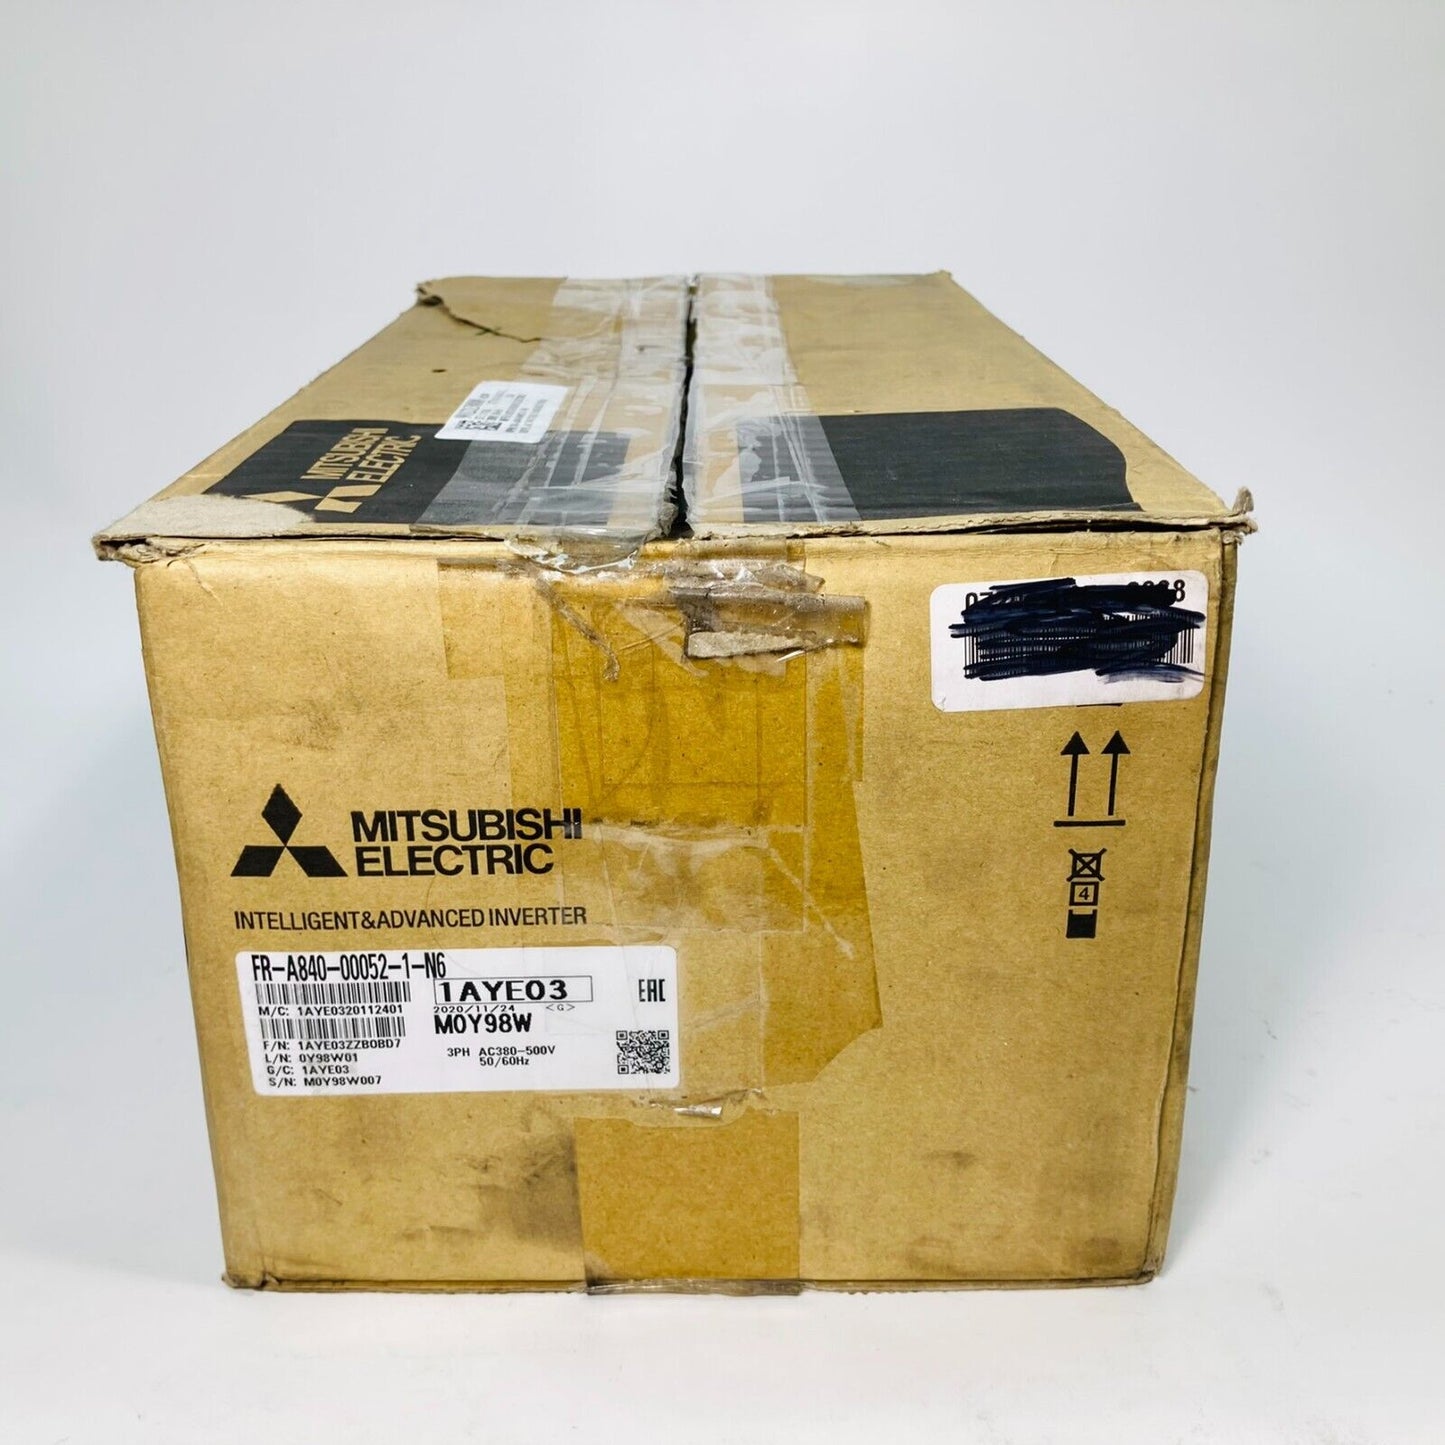 Mistsubishi FR-A840-00052-1-N6 Drive, New in box, DAMAGED, See pictures